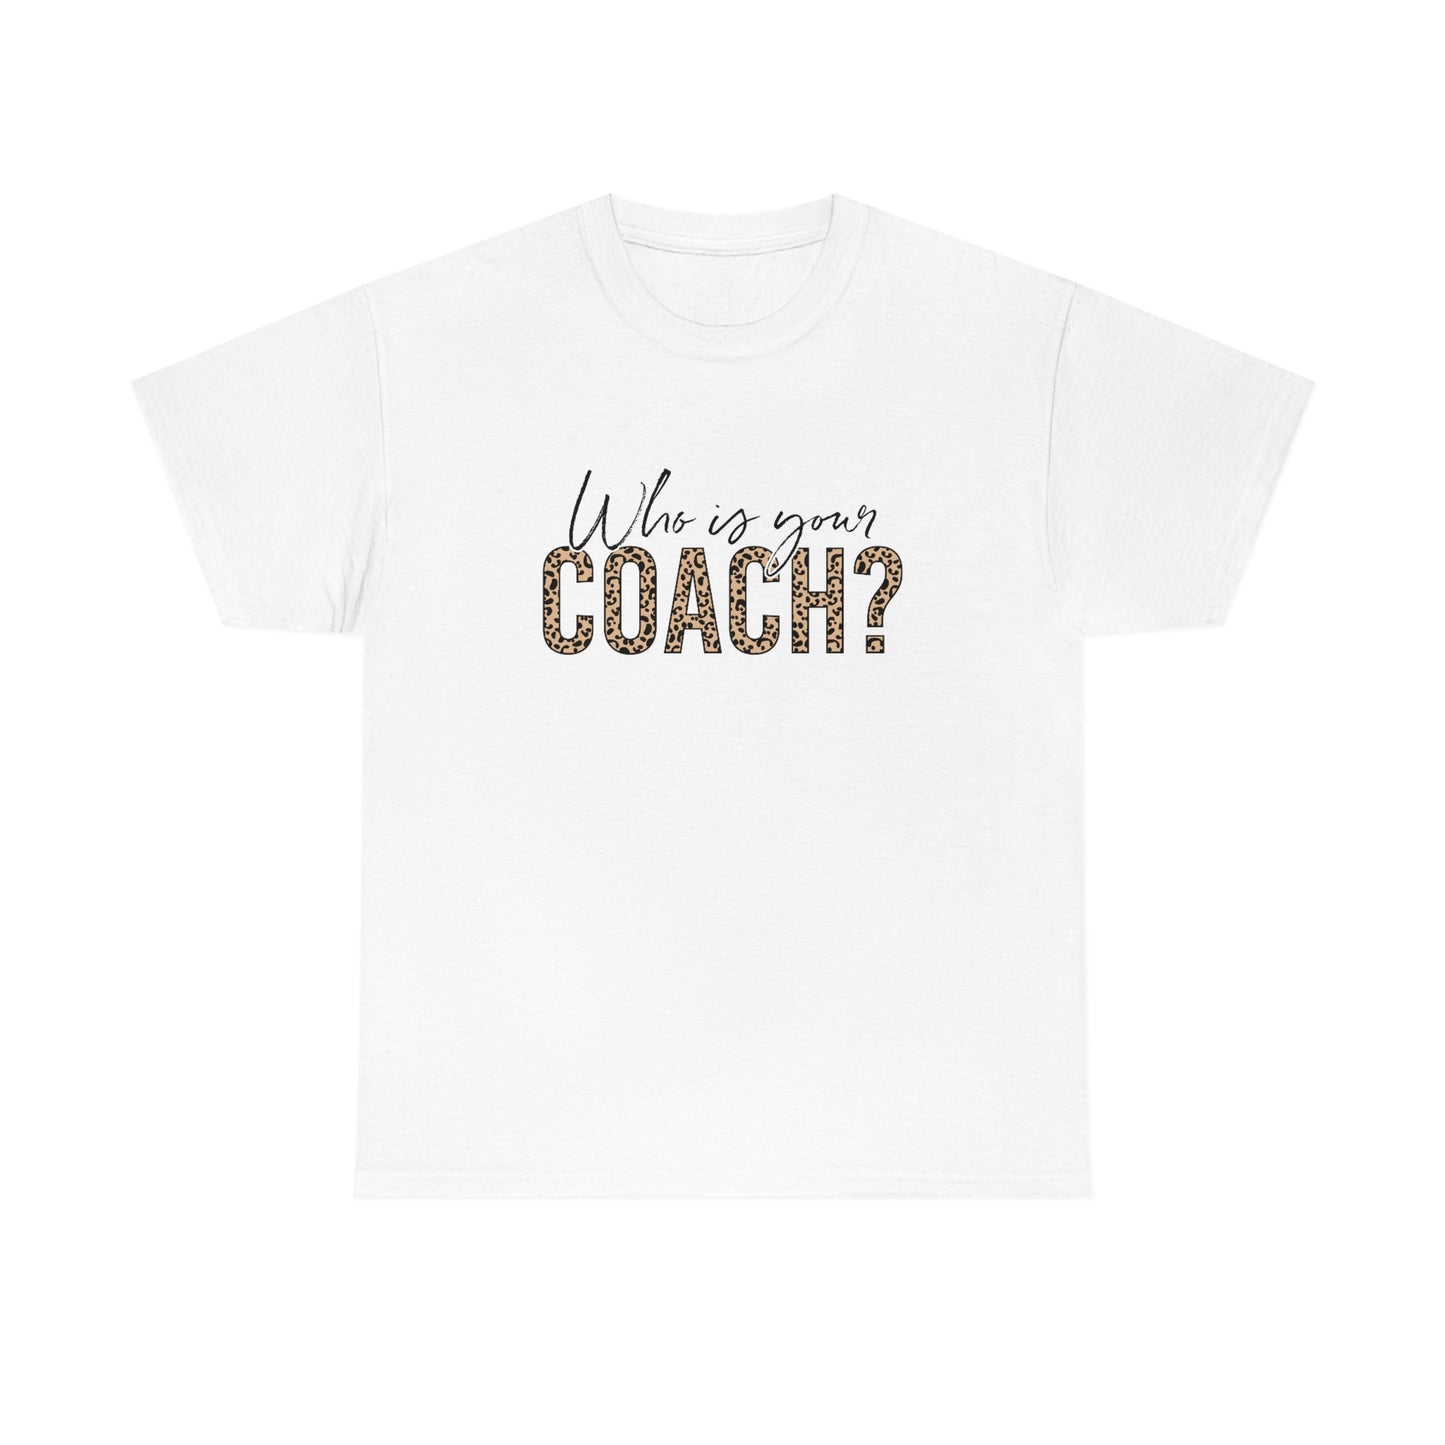 Who is your coach Tee